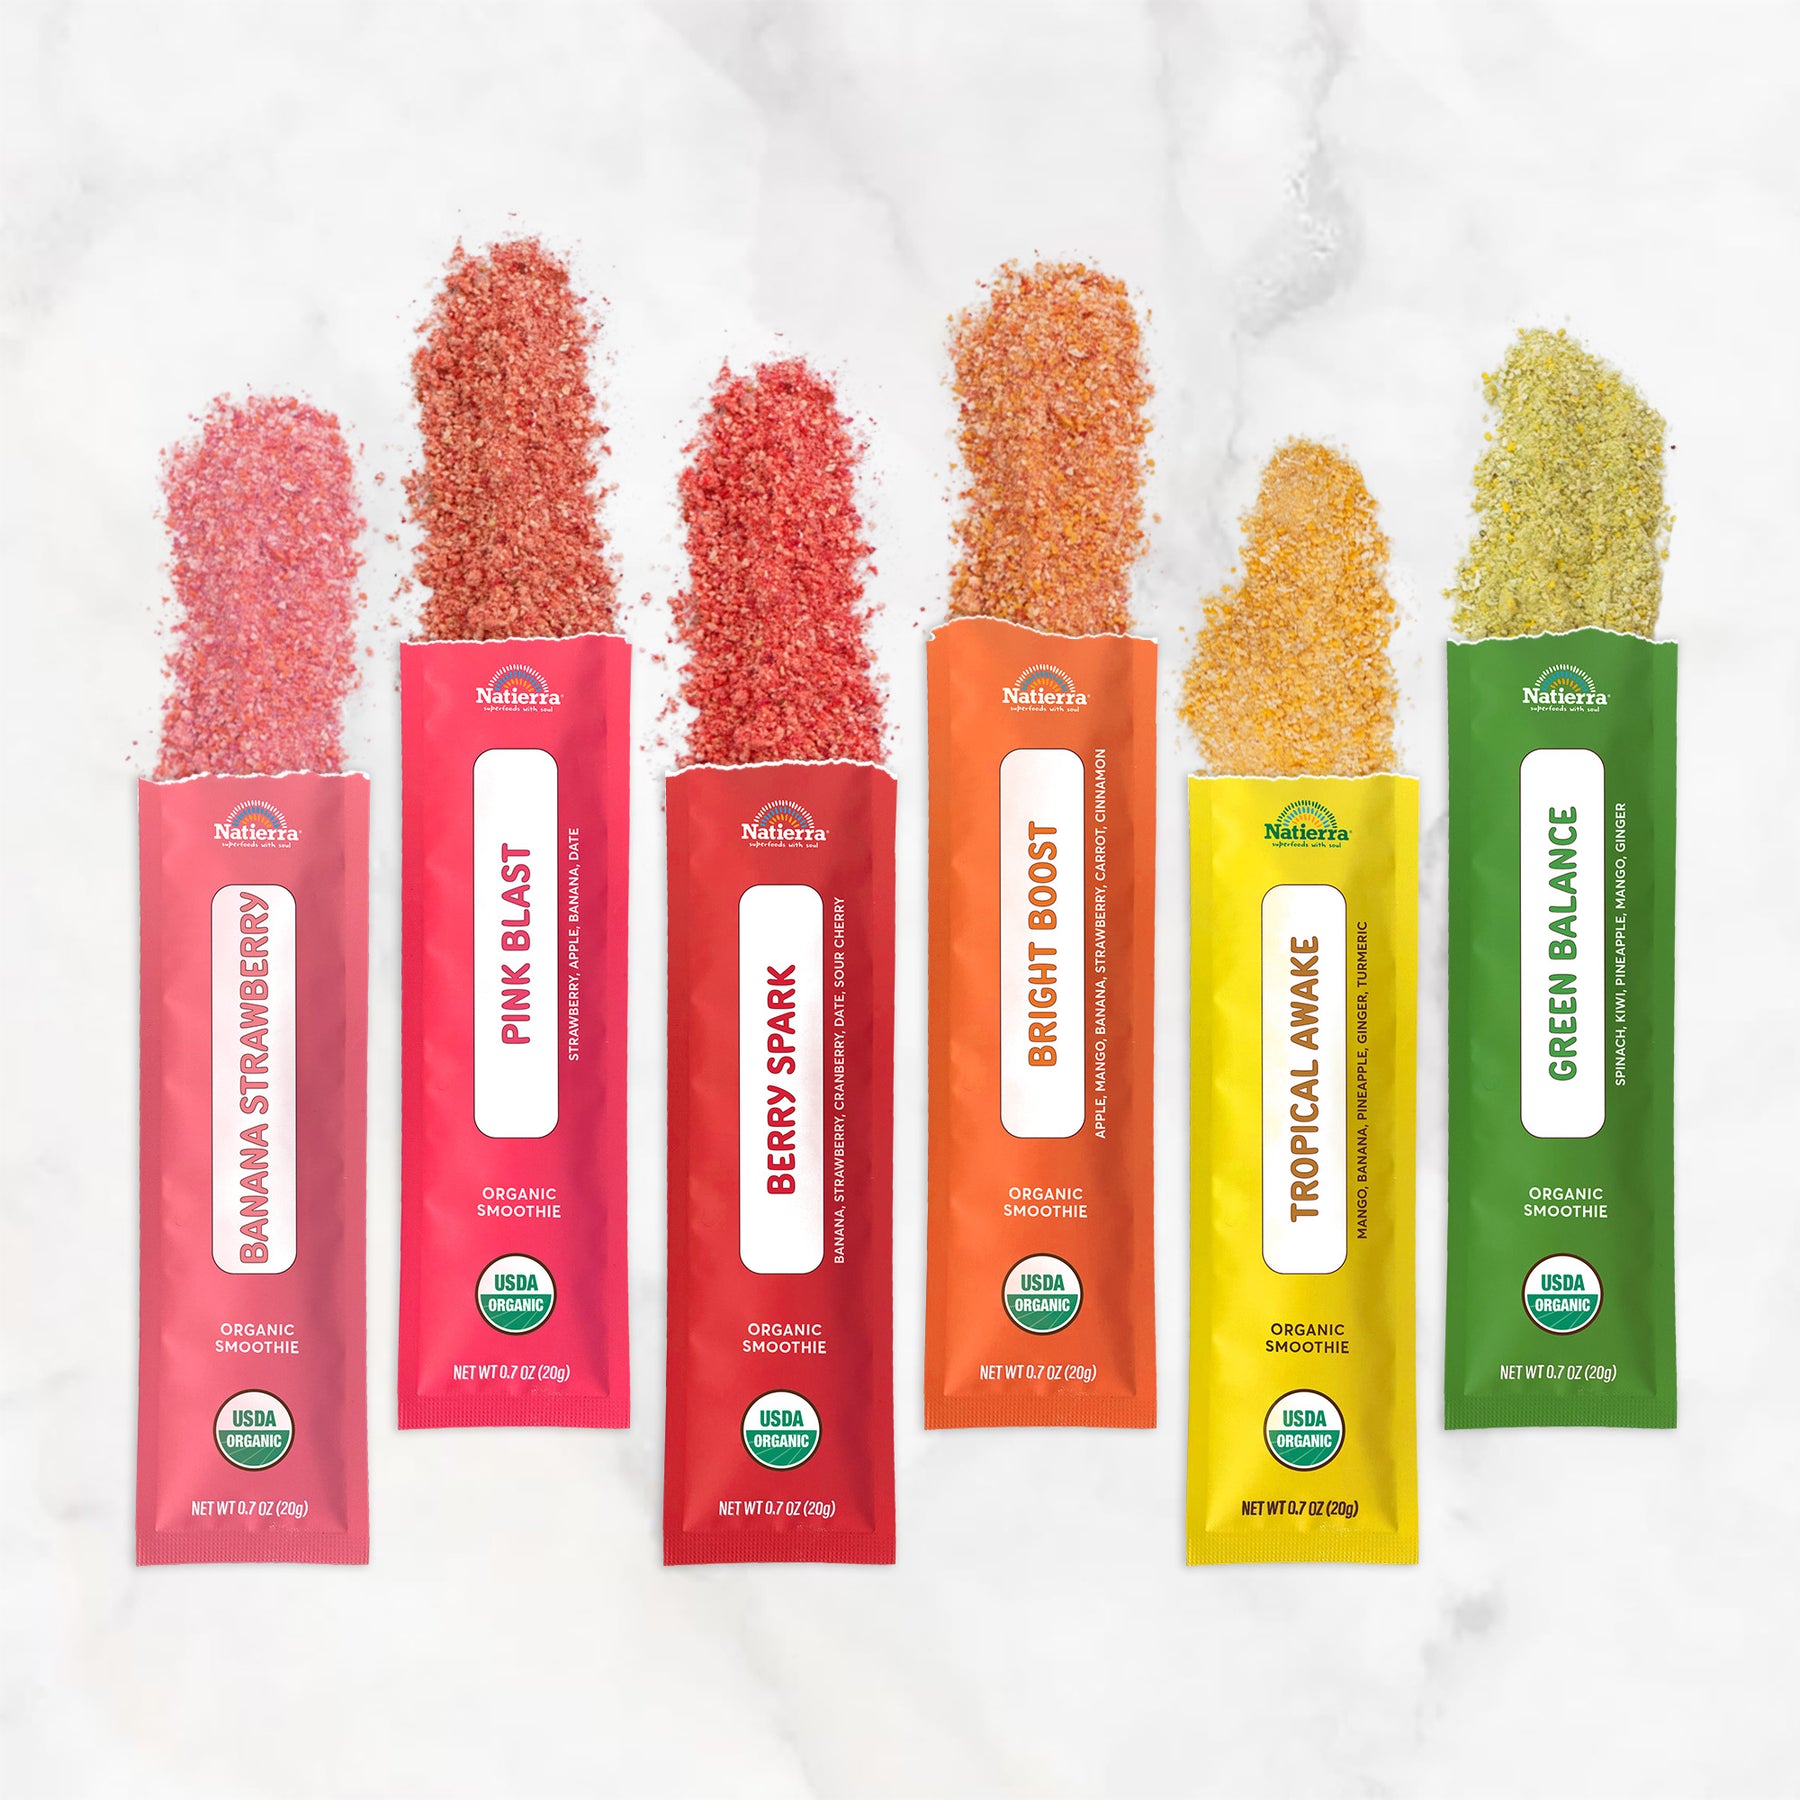 Shot of Natierra's Organic Smoothie individual stick packs on a marble counter top with colorful freeze-dried smoothie powder coming out of the packs